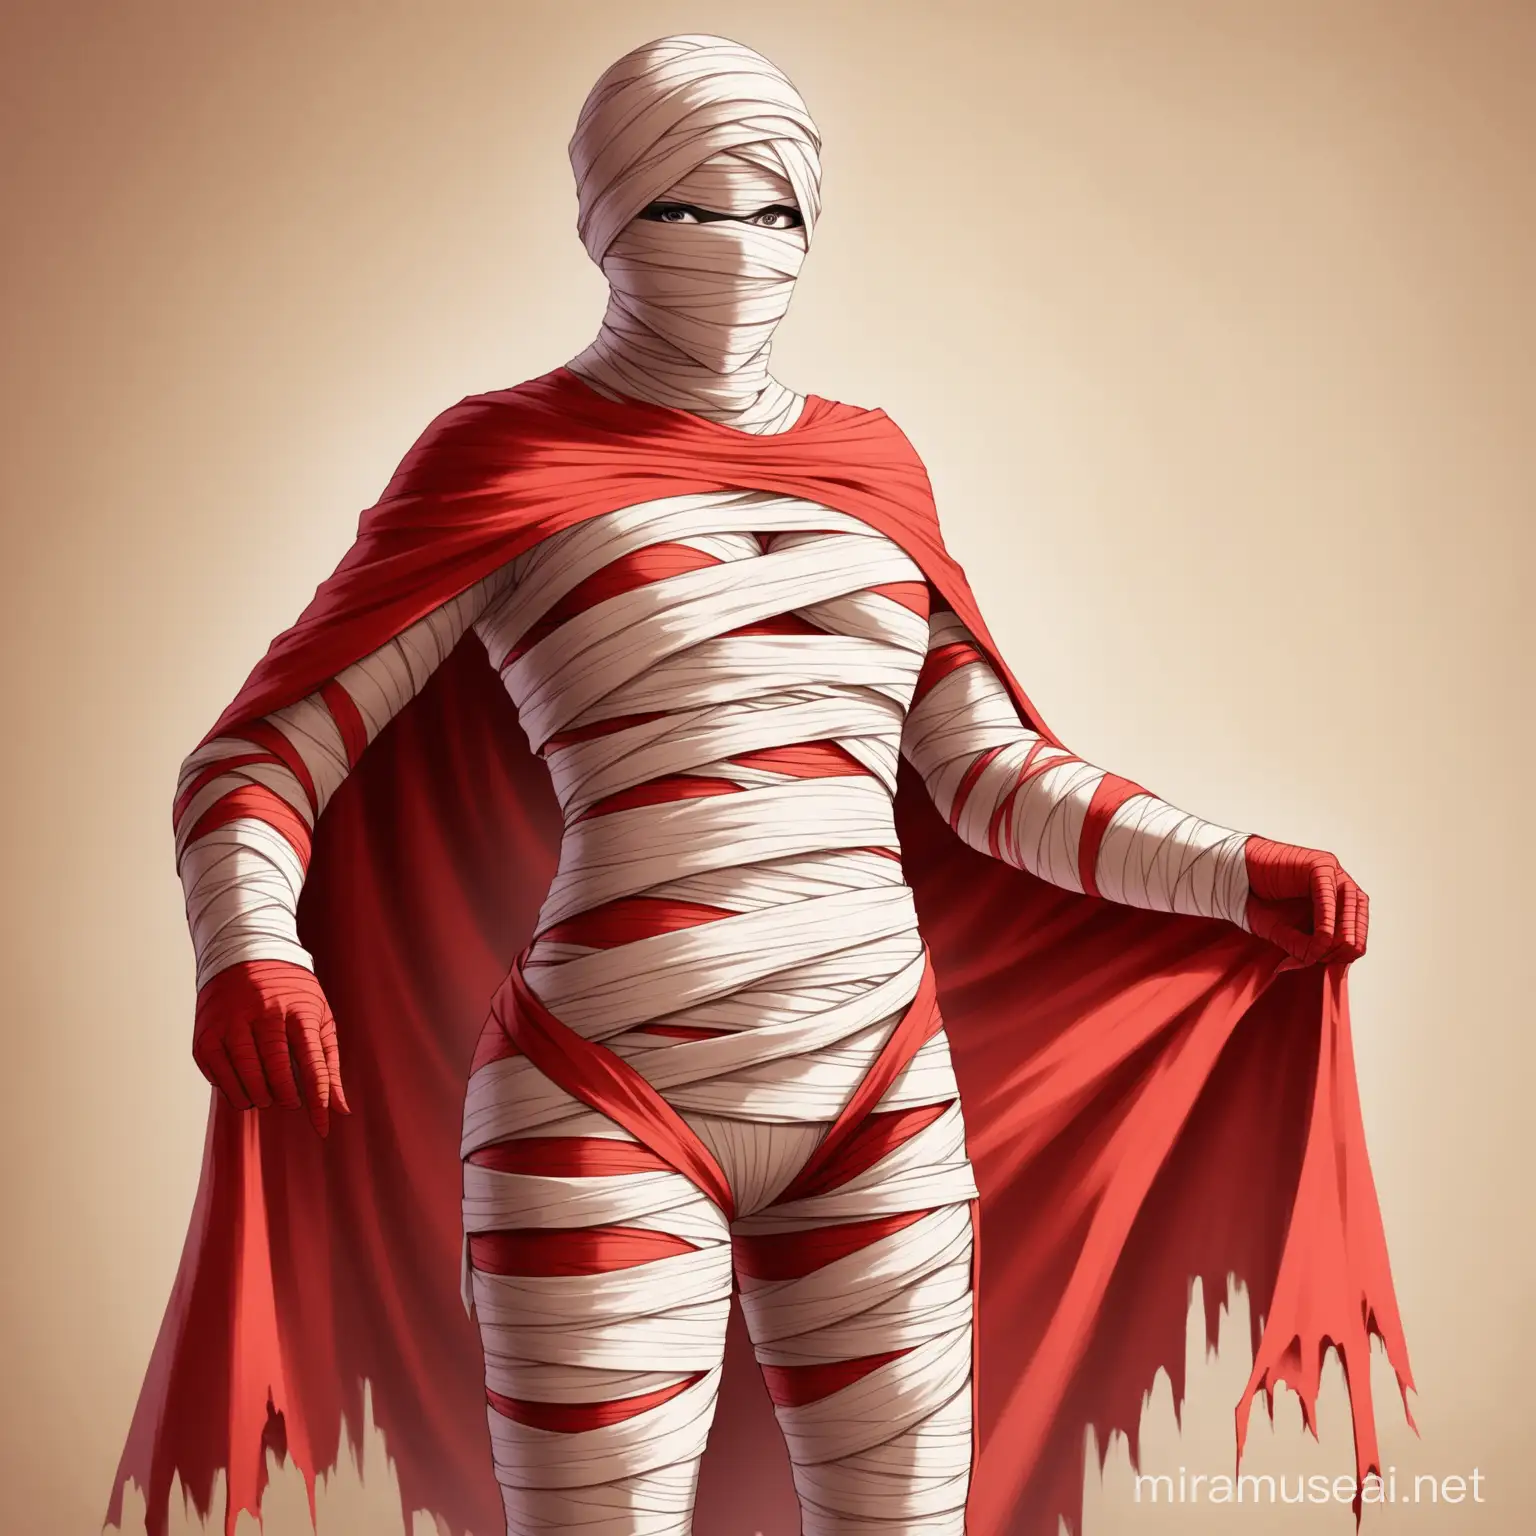 Vibrant Red Mummy Suit Costume for Halloween Costume Party